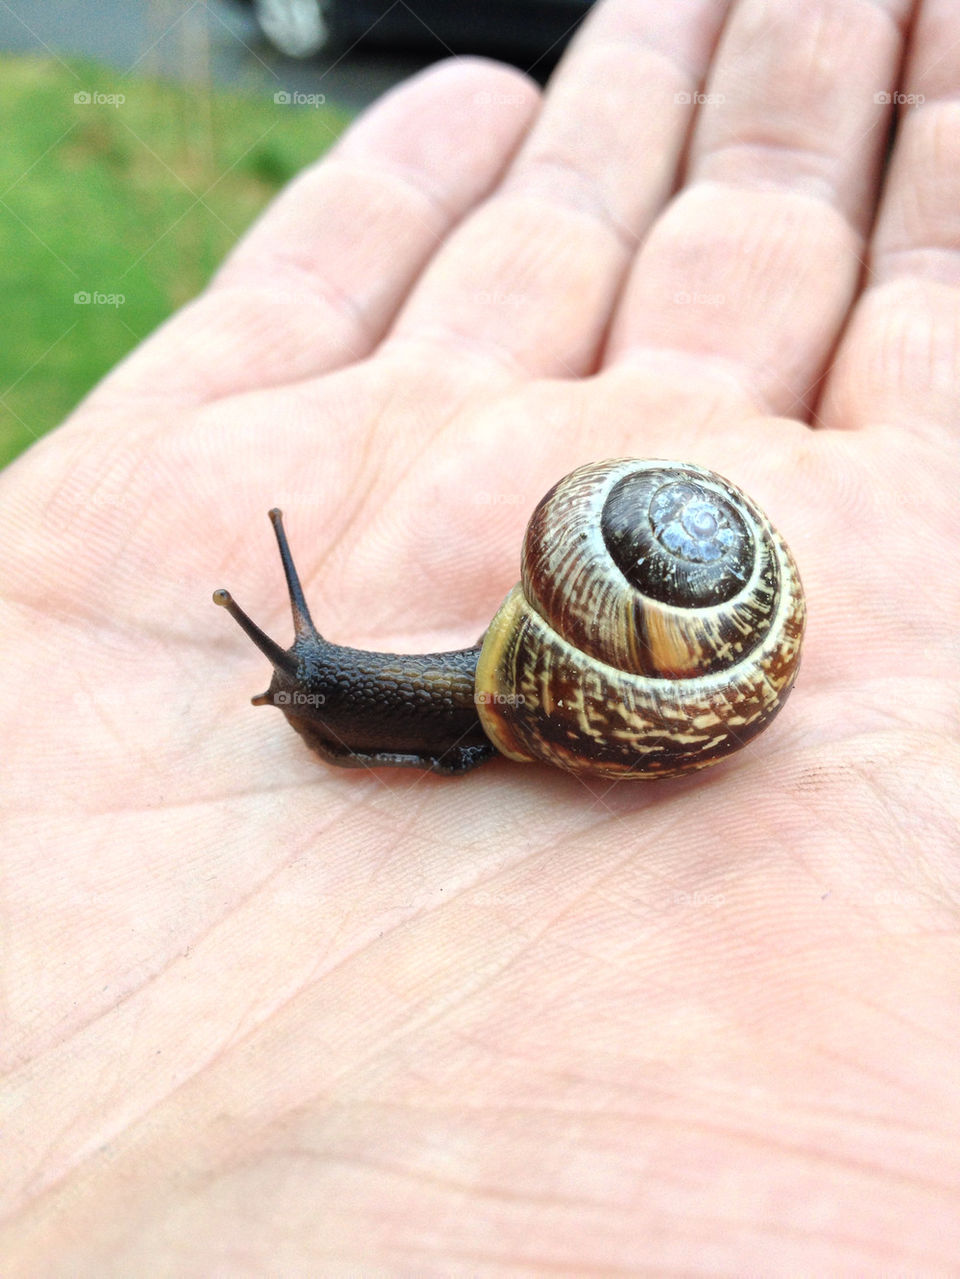 HOUSE, HAND, SLOW, SNAIL